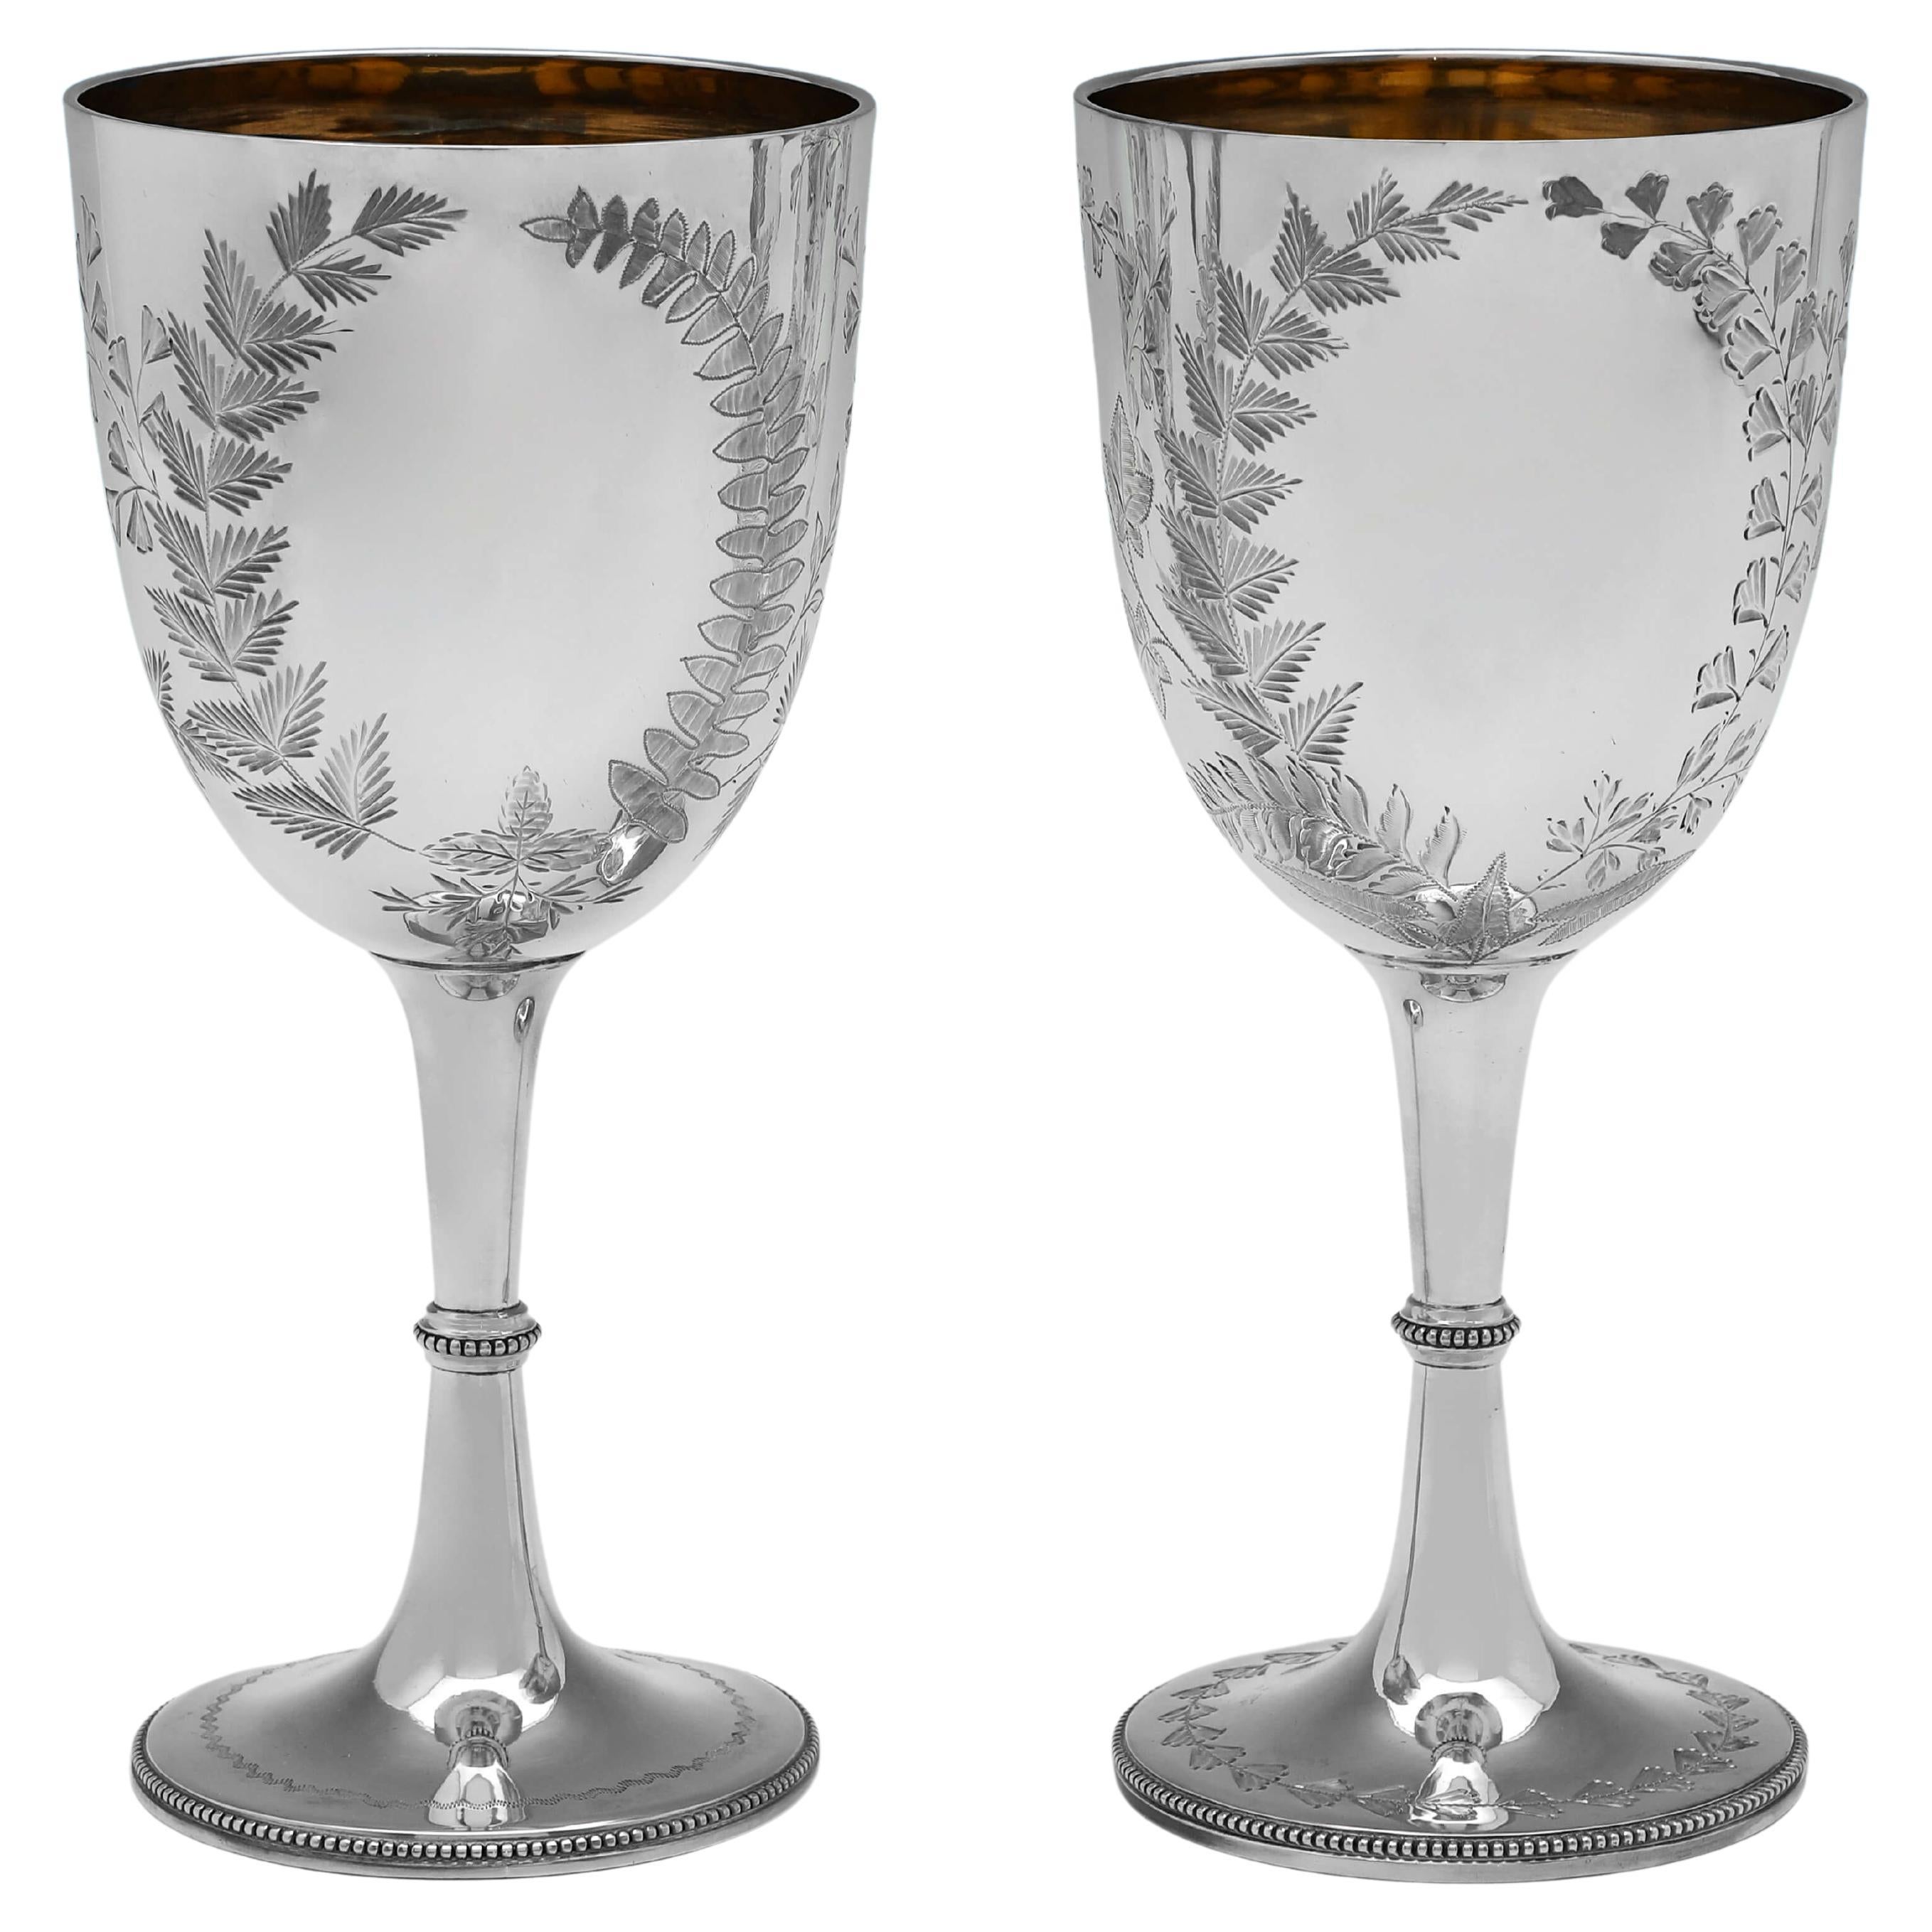 Victorian Antique Sterling Silver Pair of Wine Goblets - Henry Atkin 1883 & 1884